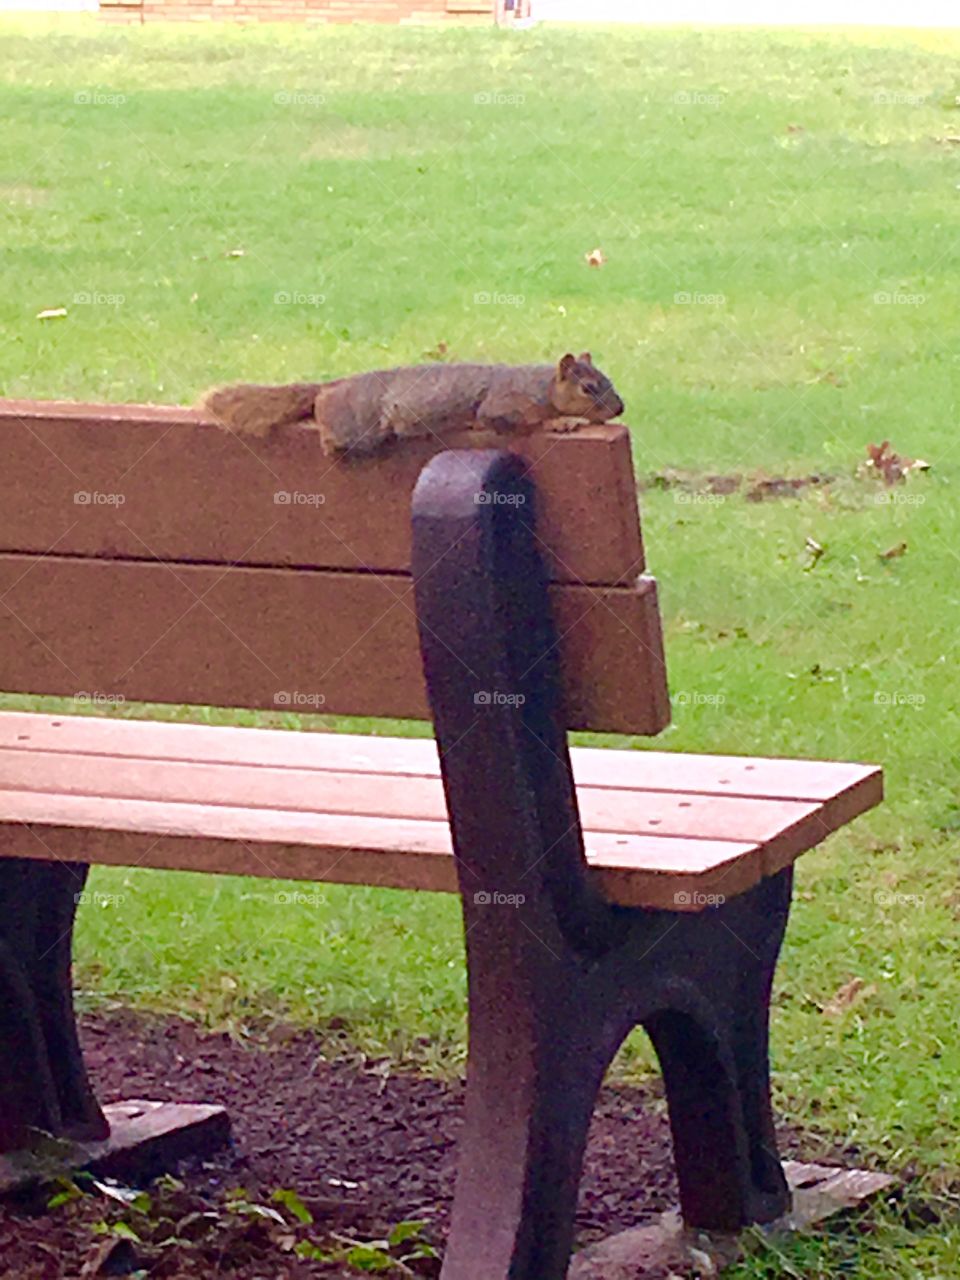 This squirrel was found sprawled out on this park bench 